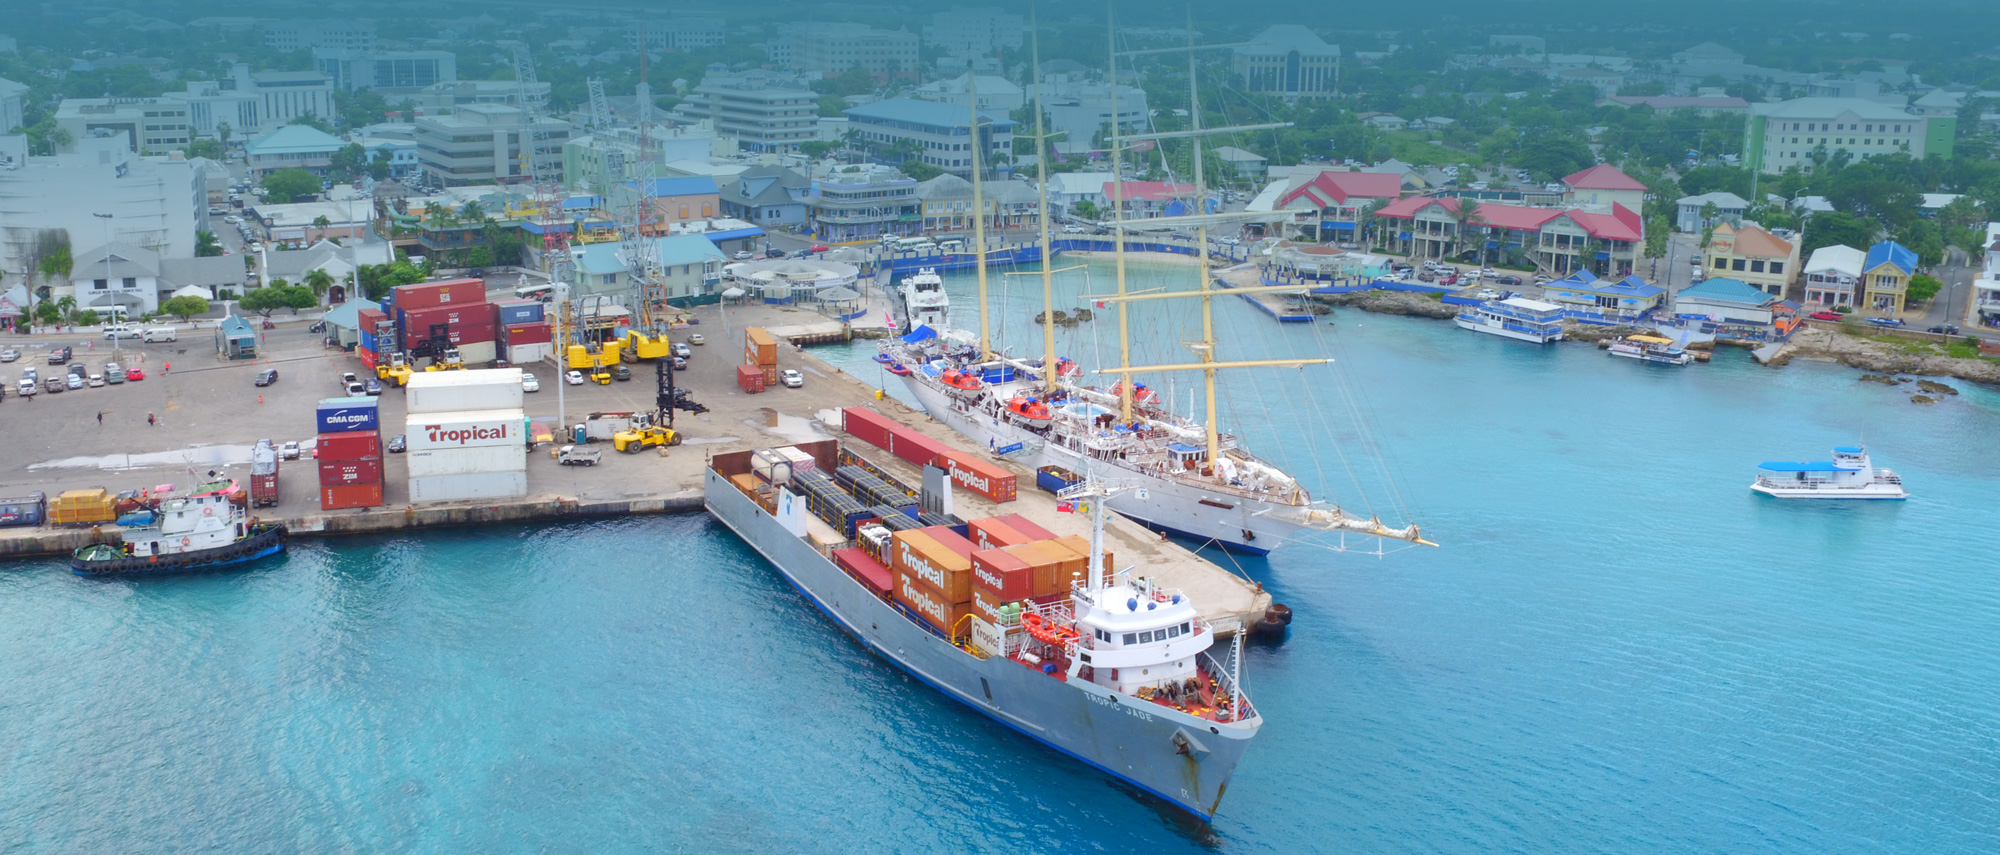 Port of George Town Arial View, Cayman Islands